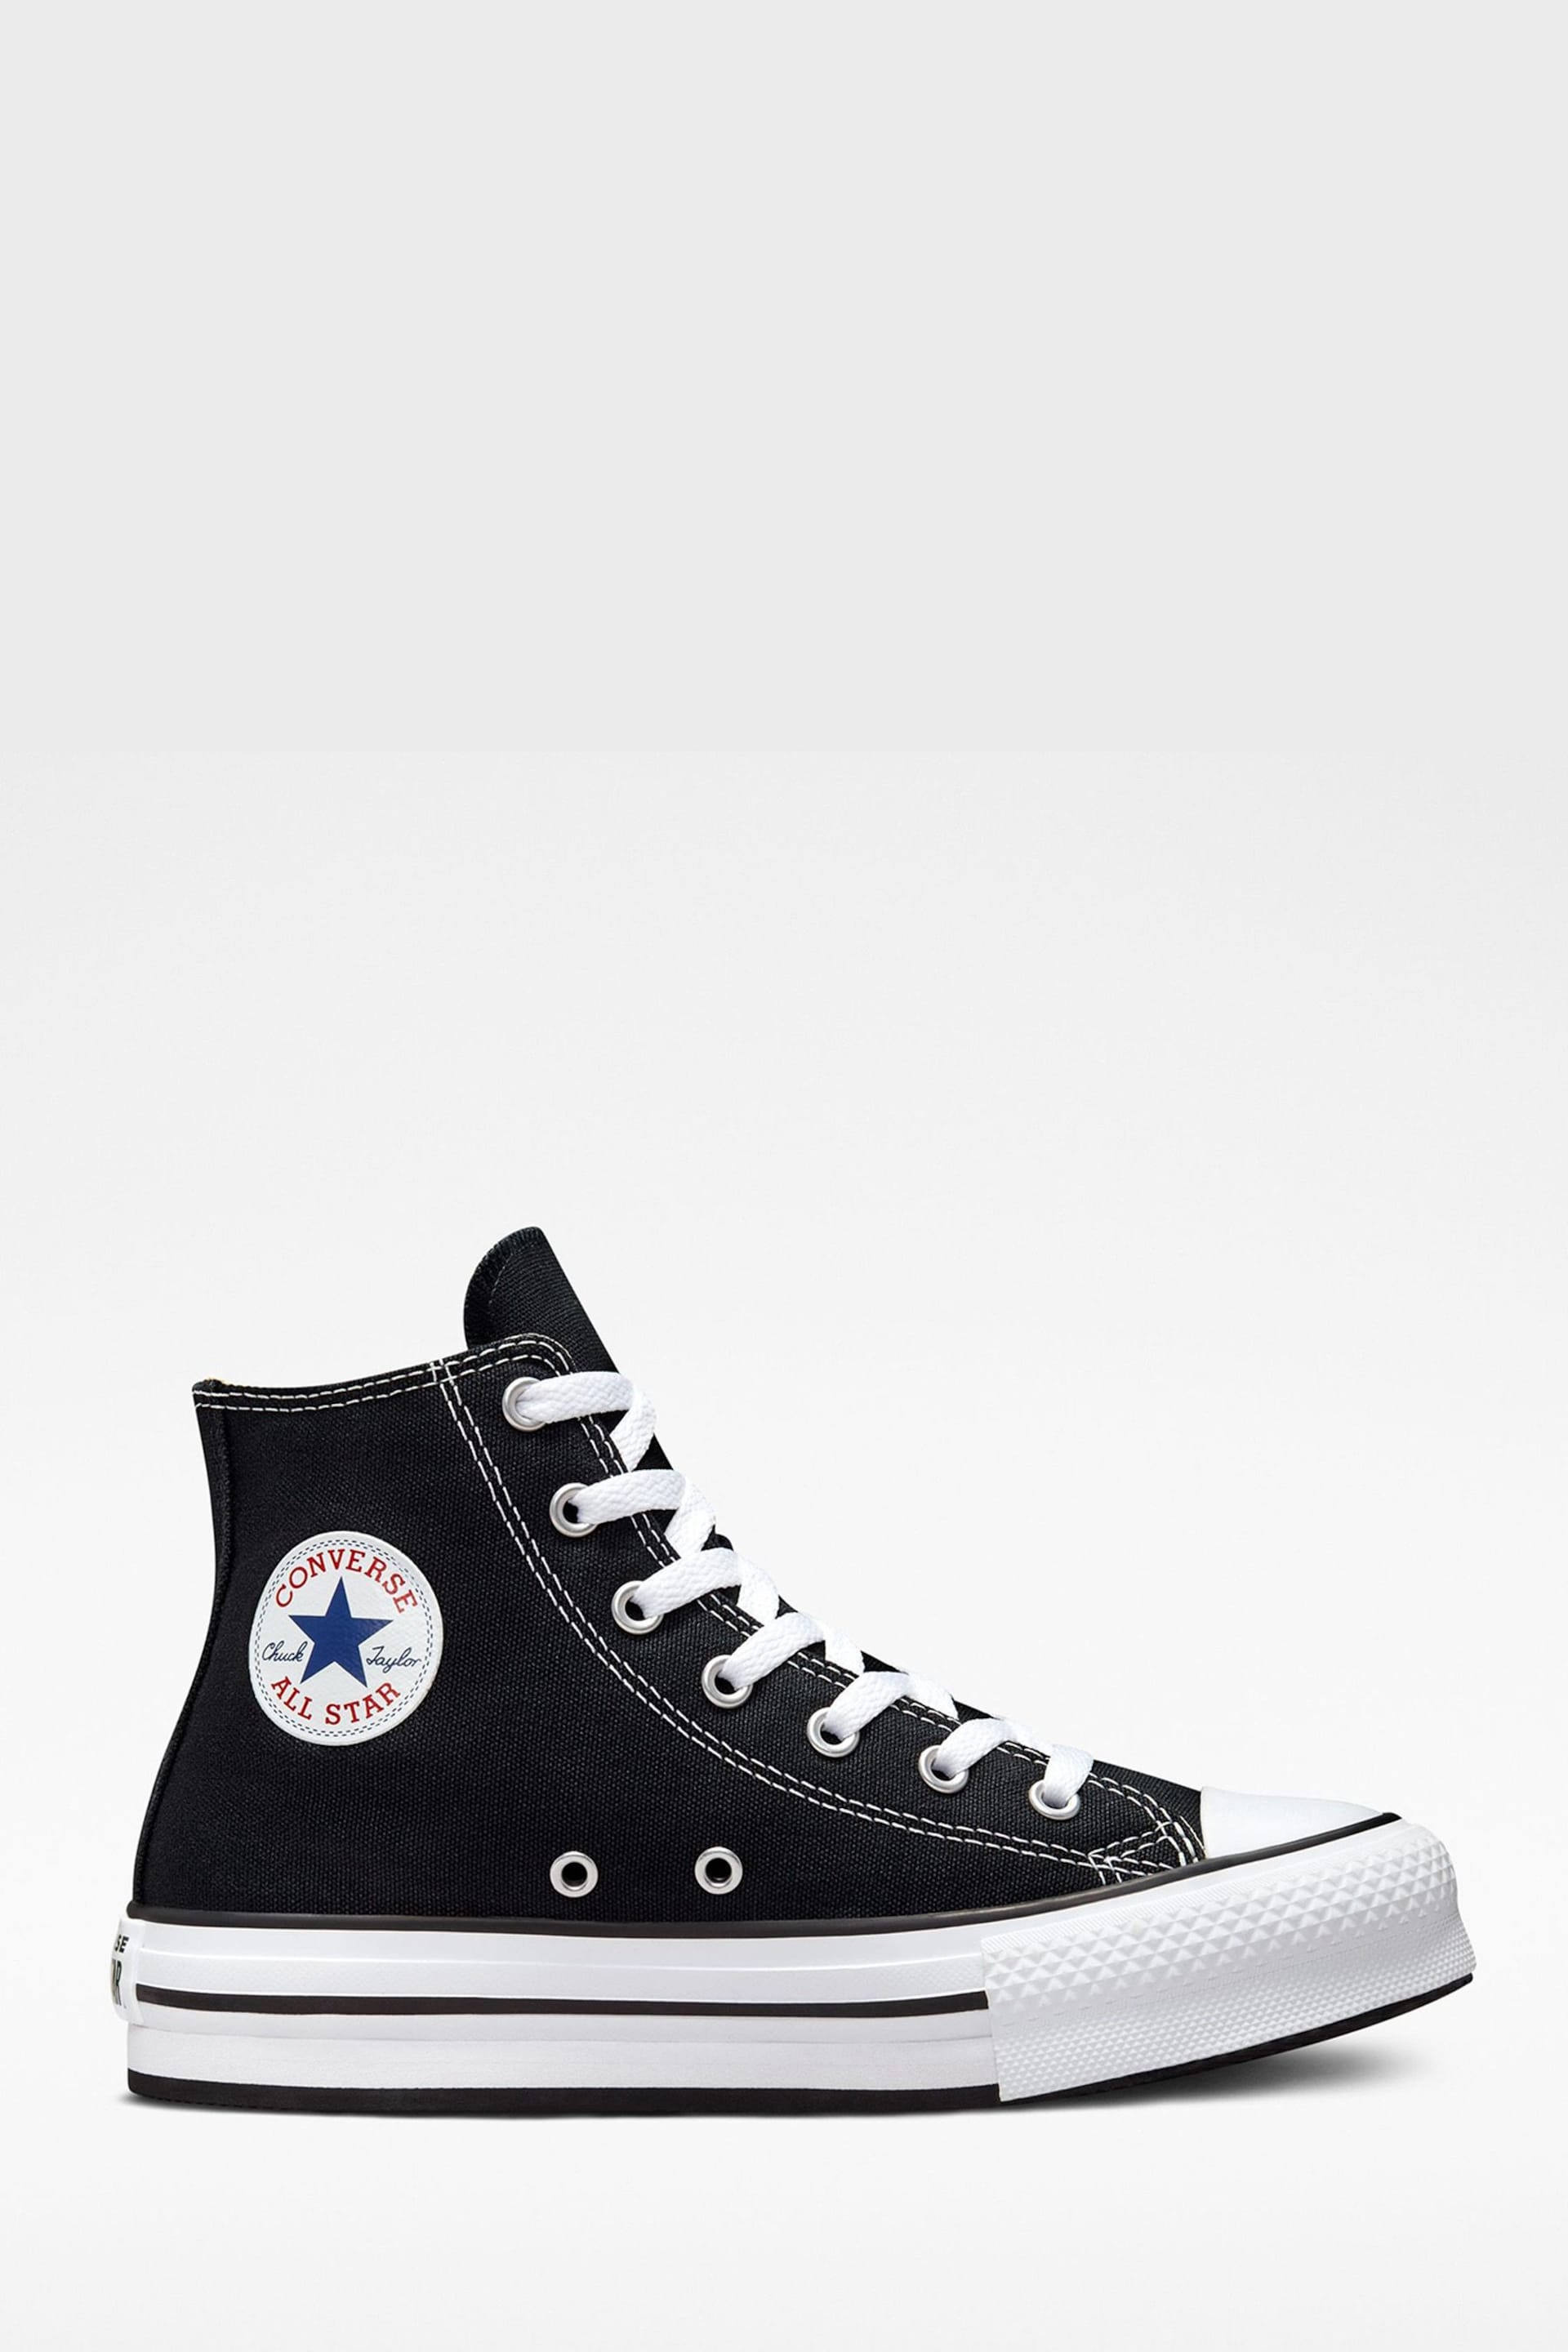 Converse Black Eva Lift High Top Youth Trainers - Image 1 of 8